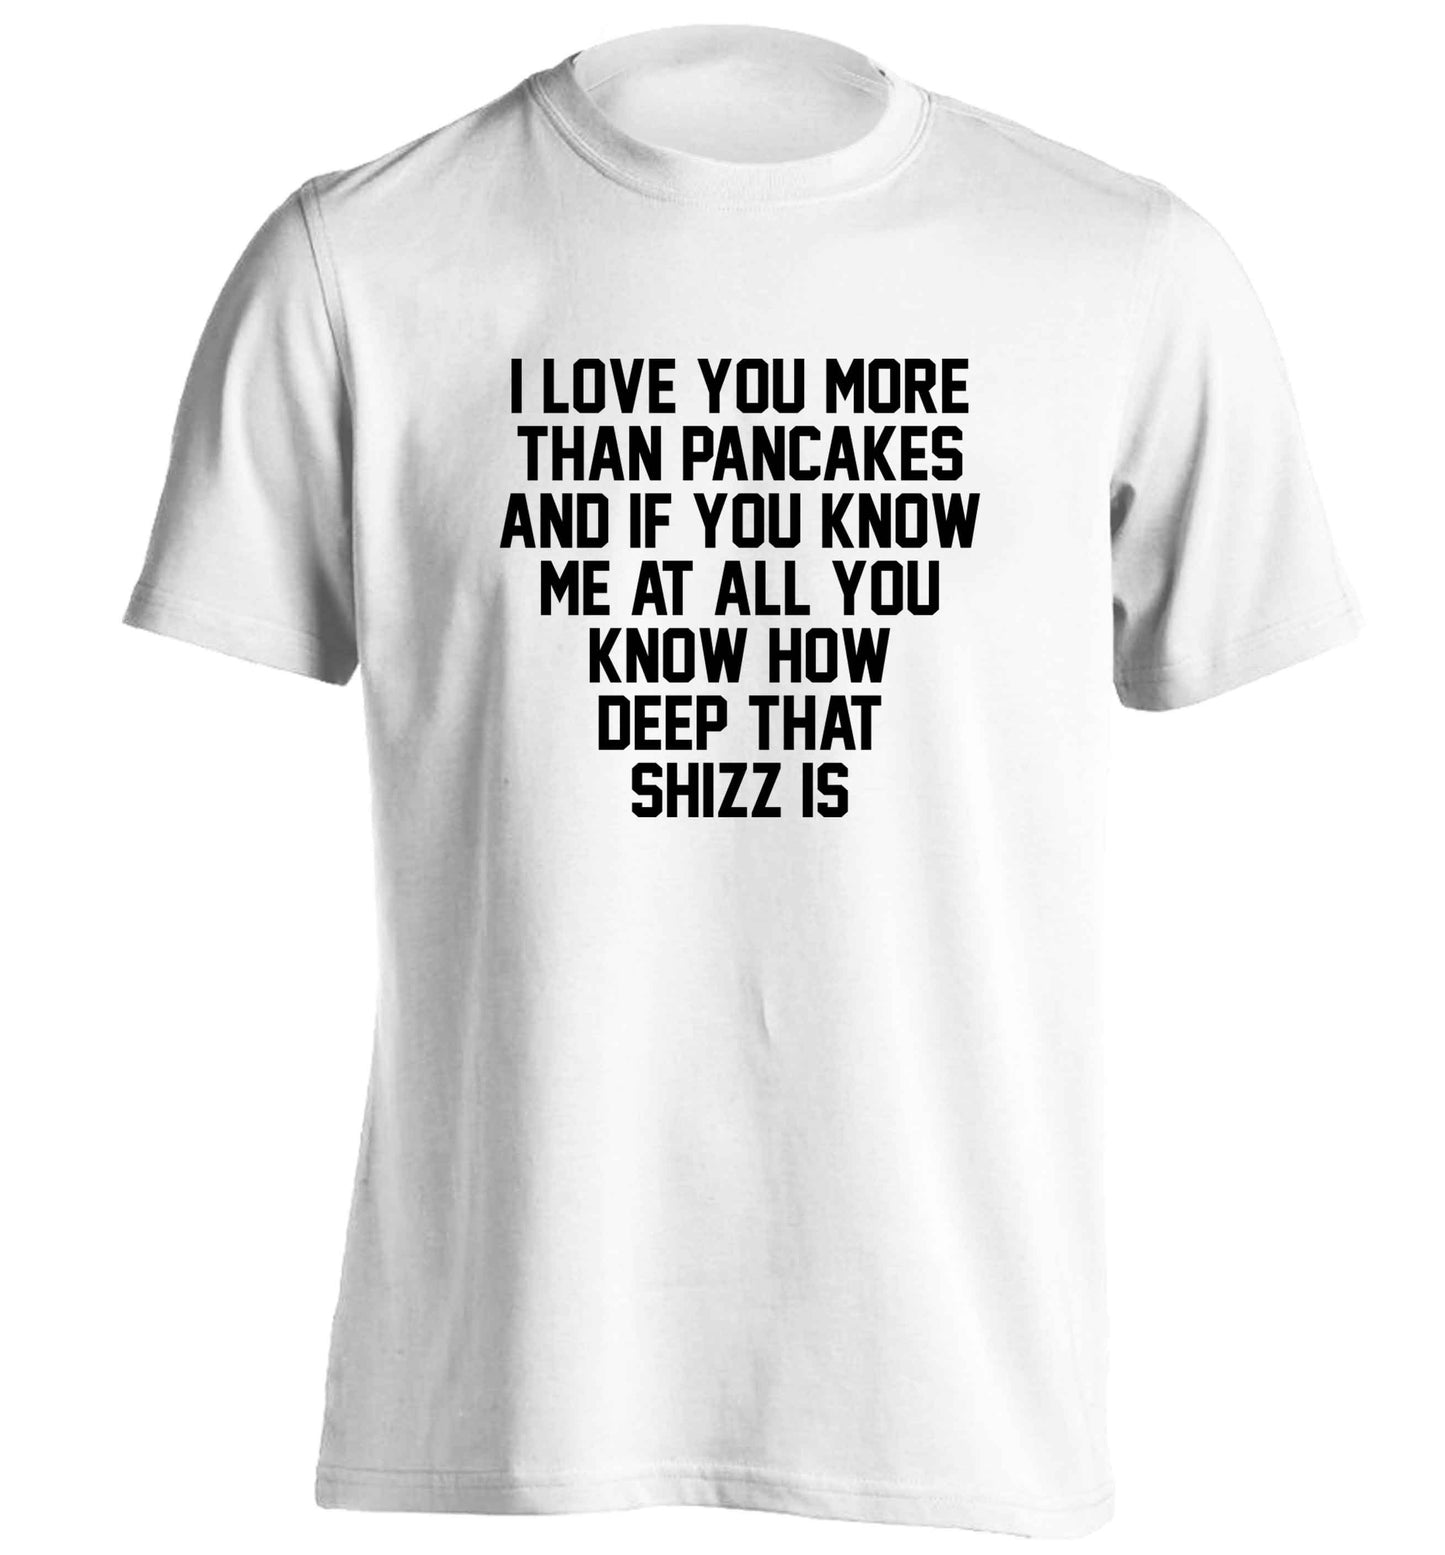 I love you more than pancakes and if you know me at all you know how deep that shizz is adults unisex white Tshirt 2XL